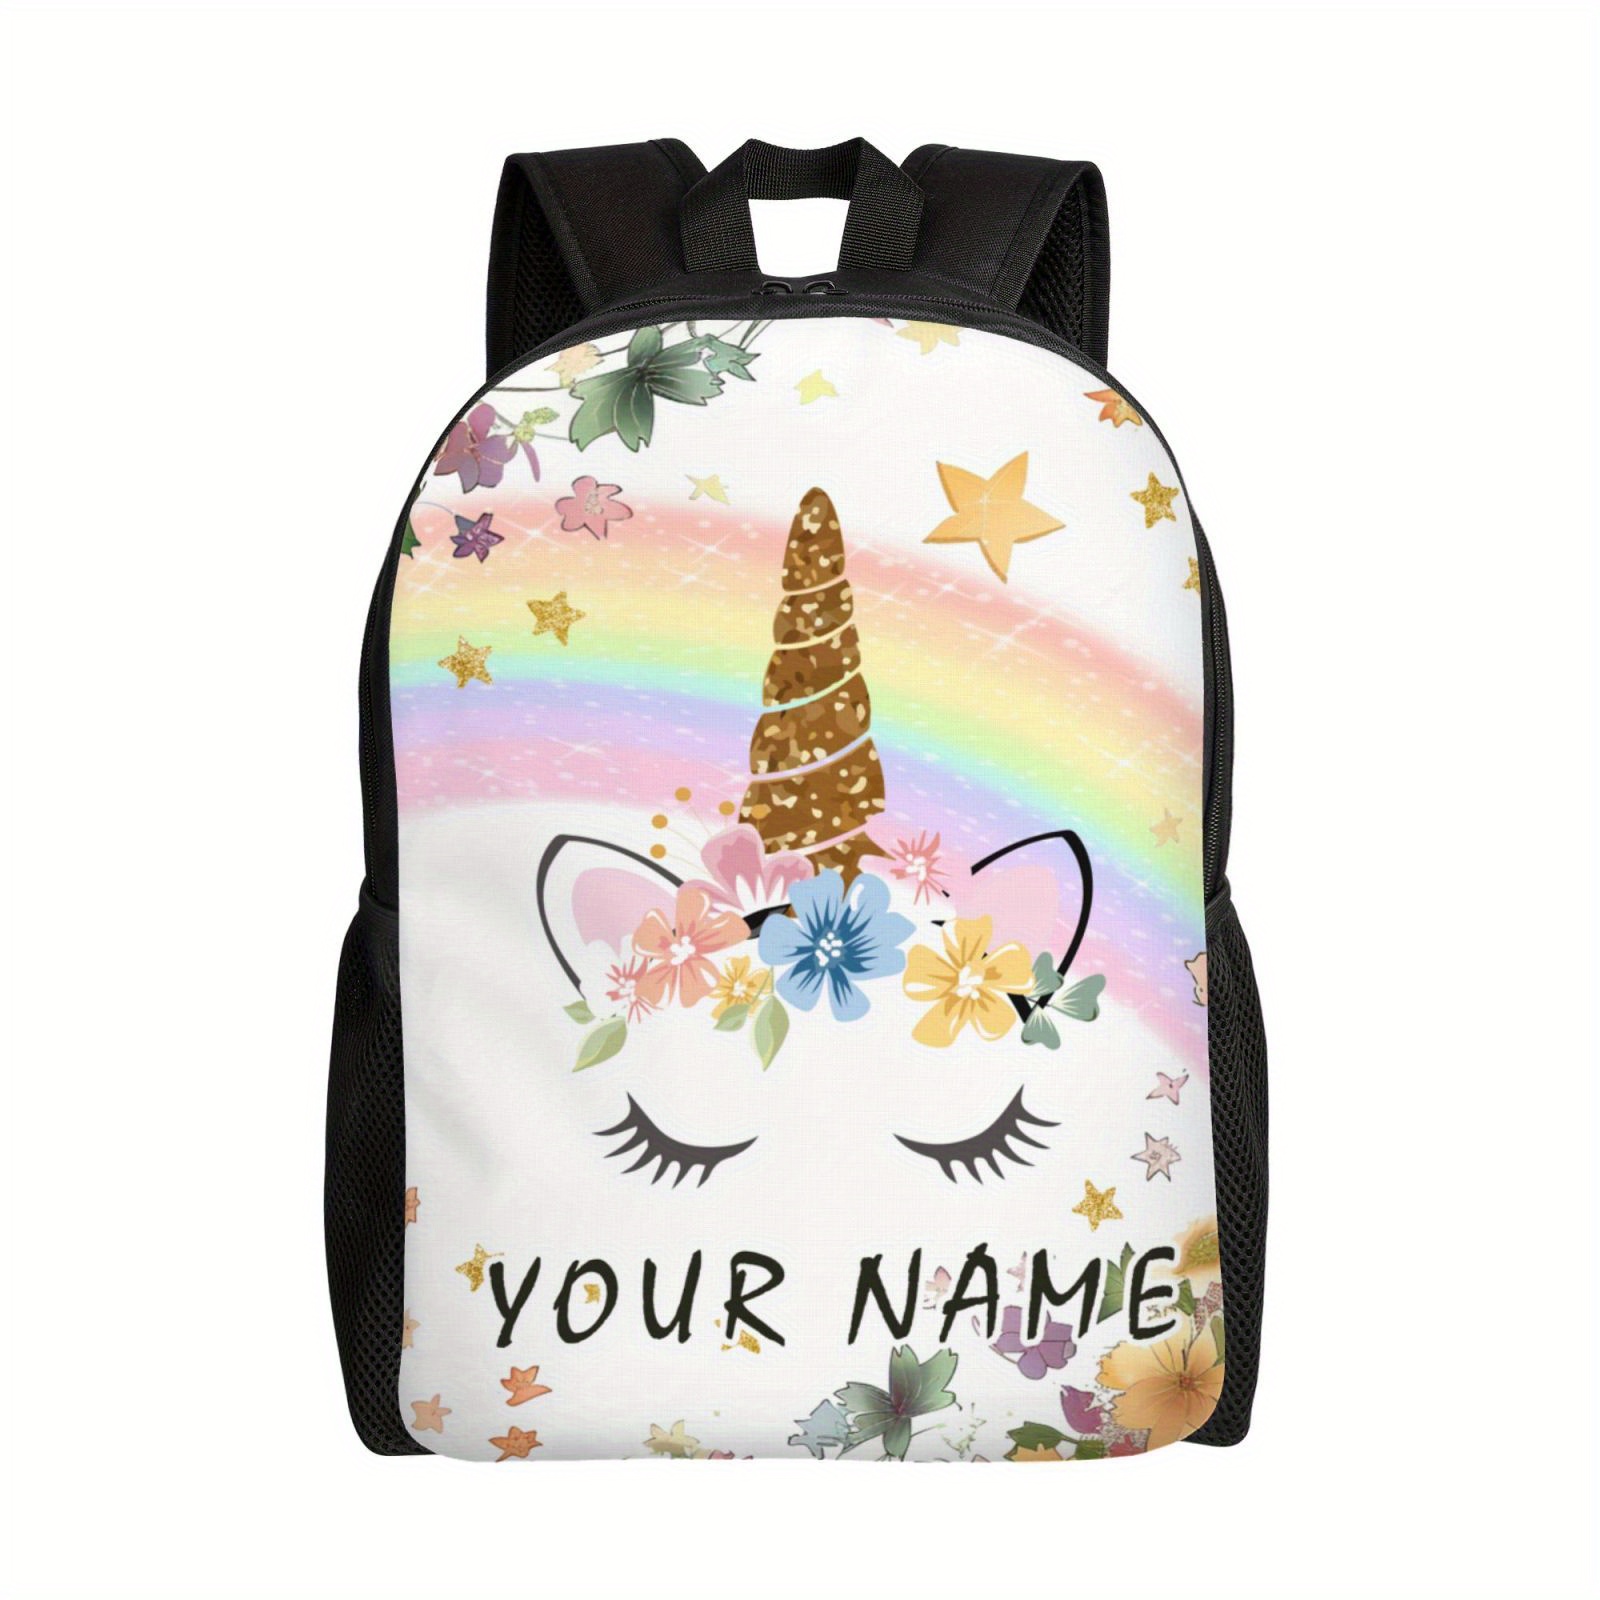 

Custom Backpack, Personalized For Men Women Students, Unicorn Backpack With Name, Customized Casual Backpacks Gifts For Picnic Travel Camping, School, Work, Business Trips And Sports